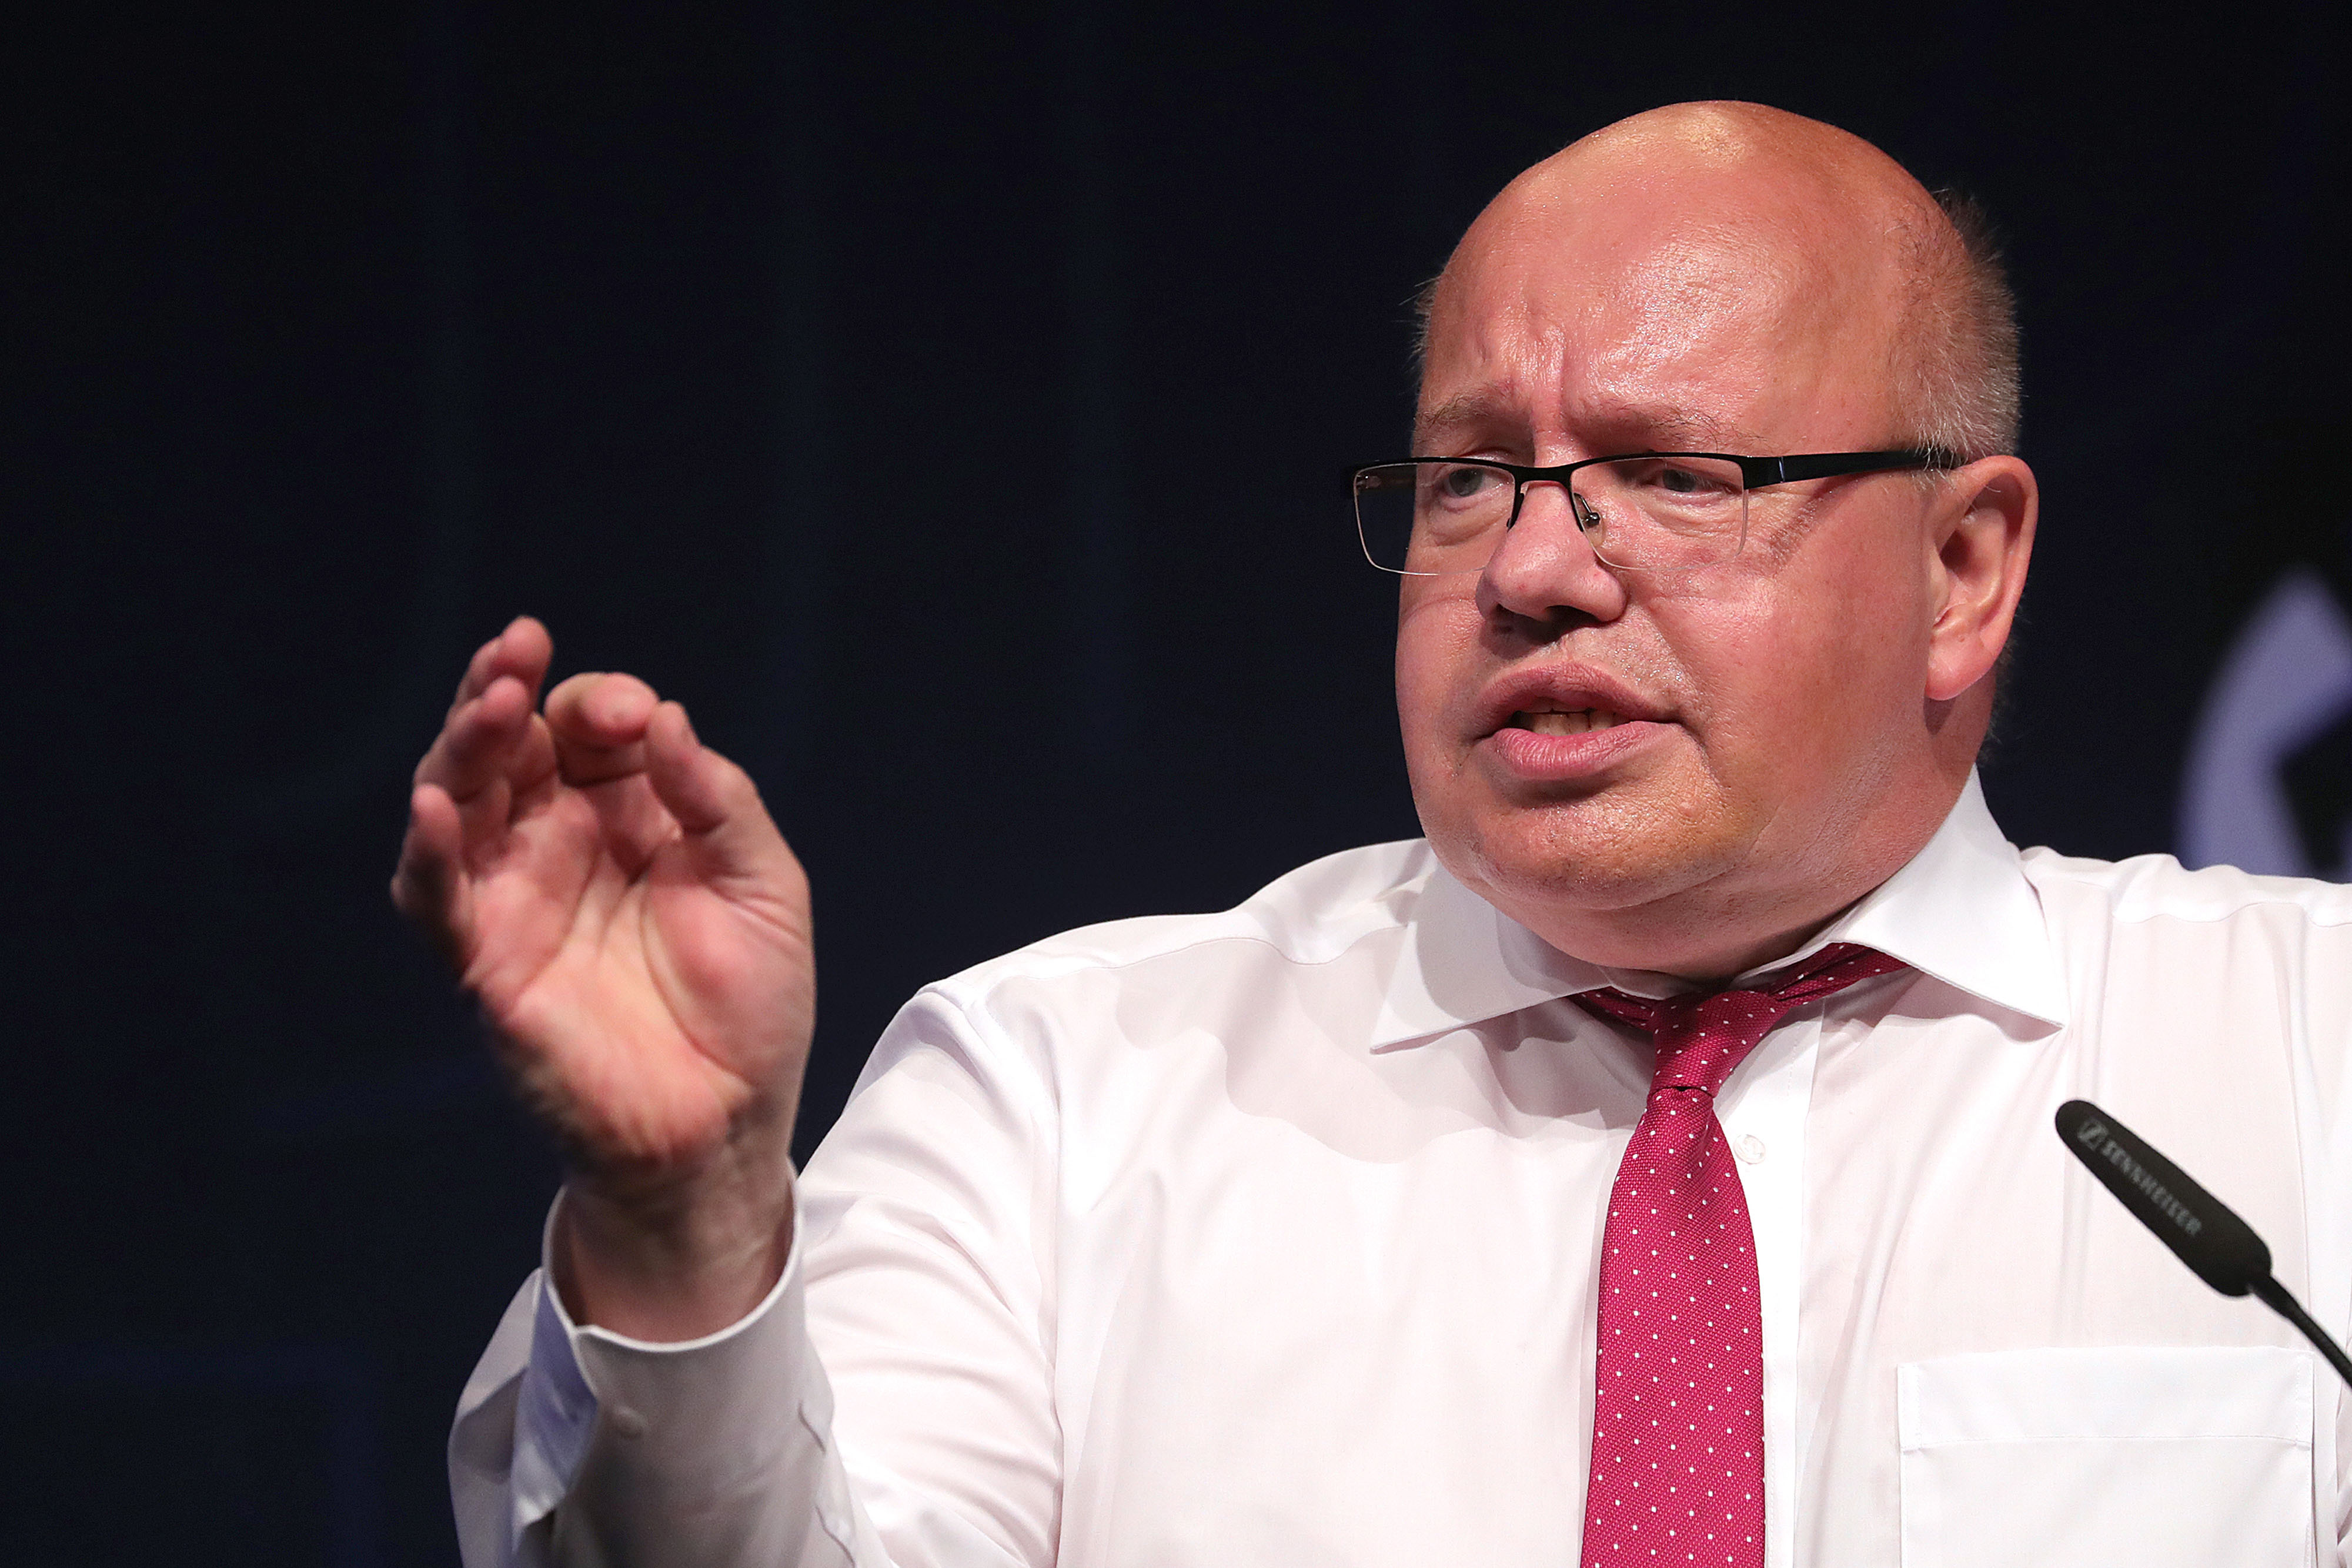 Peter Altmaier, Germany's economy minister, gestures while speaking at the Federation of German Industries (BDI) conference in Berlin, Germany, on Tuesday, June 4, 2019. German Chancellor Angela Merkel blasted the European Union's merger rules for failing to take into account growing Chinese dominance and hampering efforts to compete on the global stage.